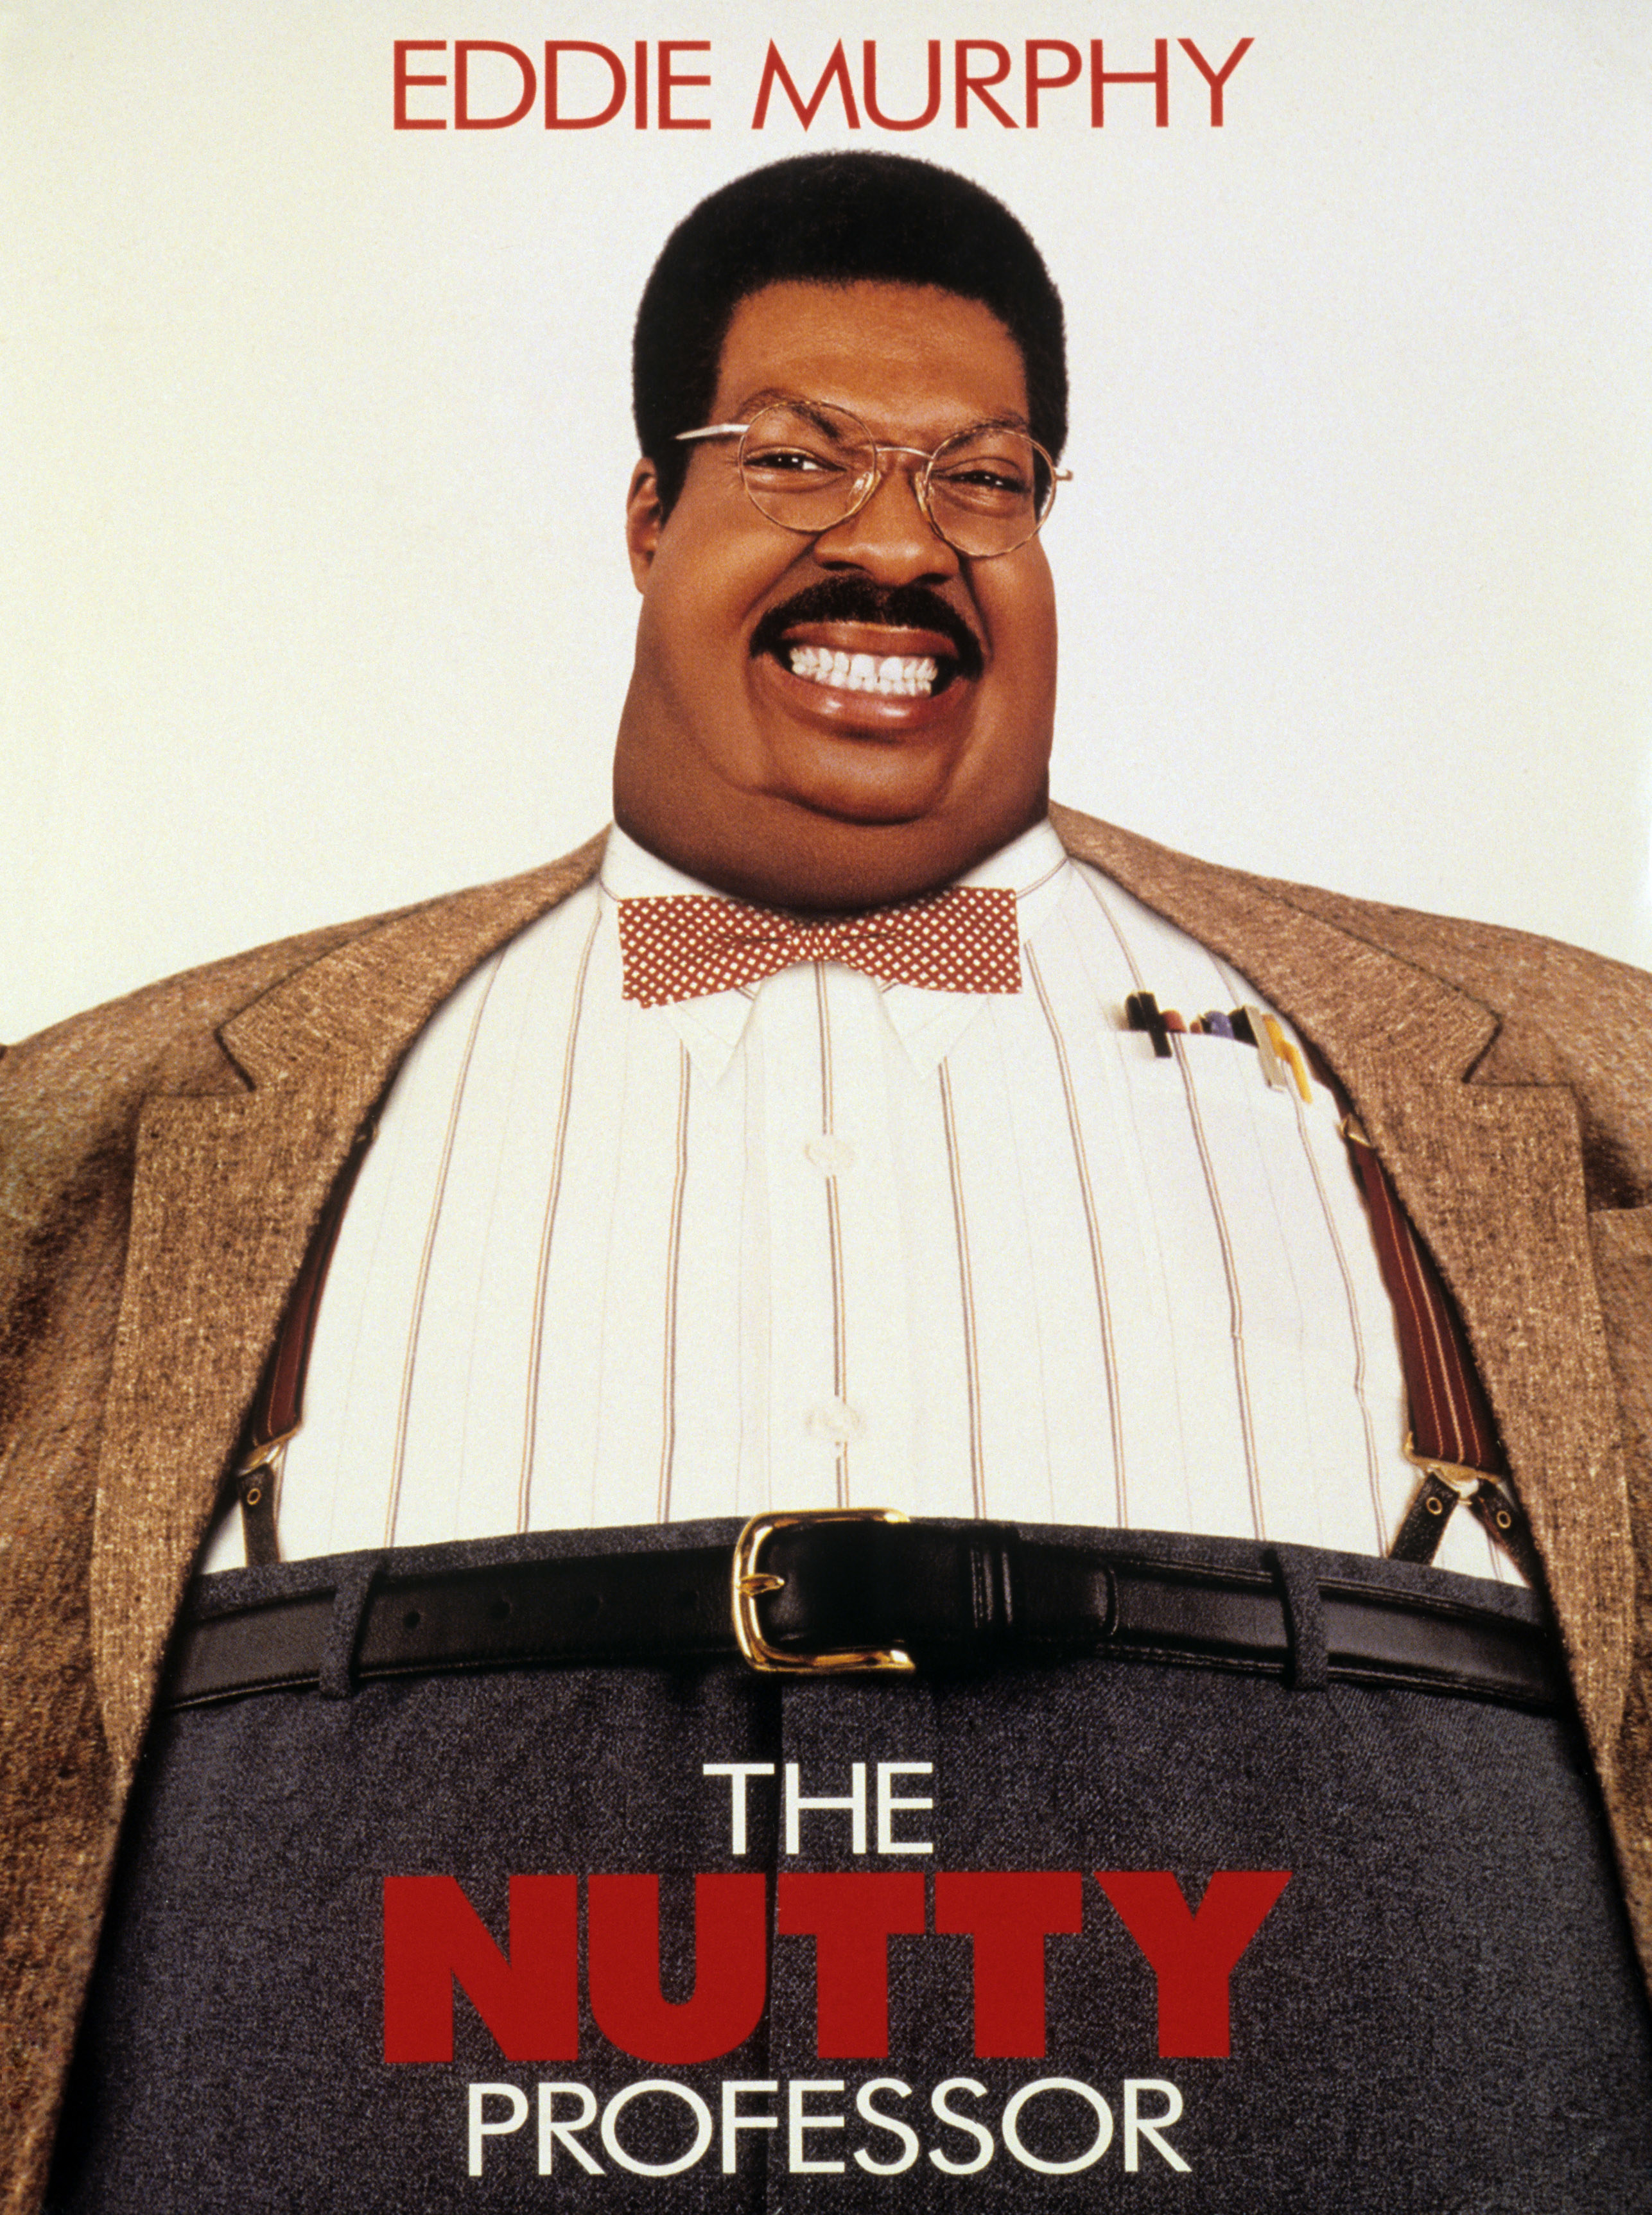 Eddie Murphy in the poster for the film